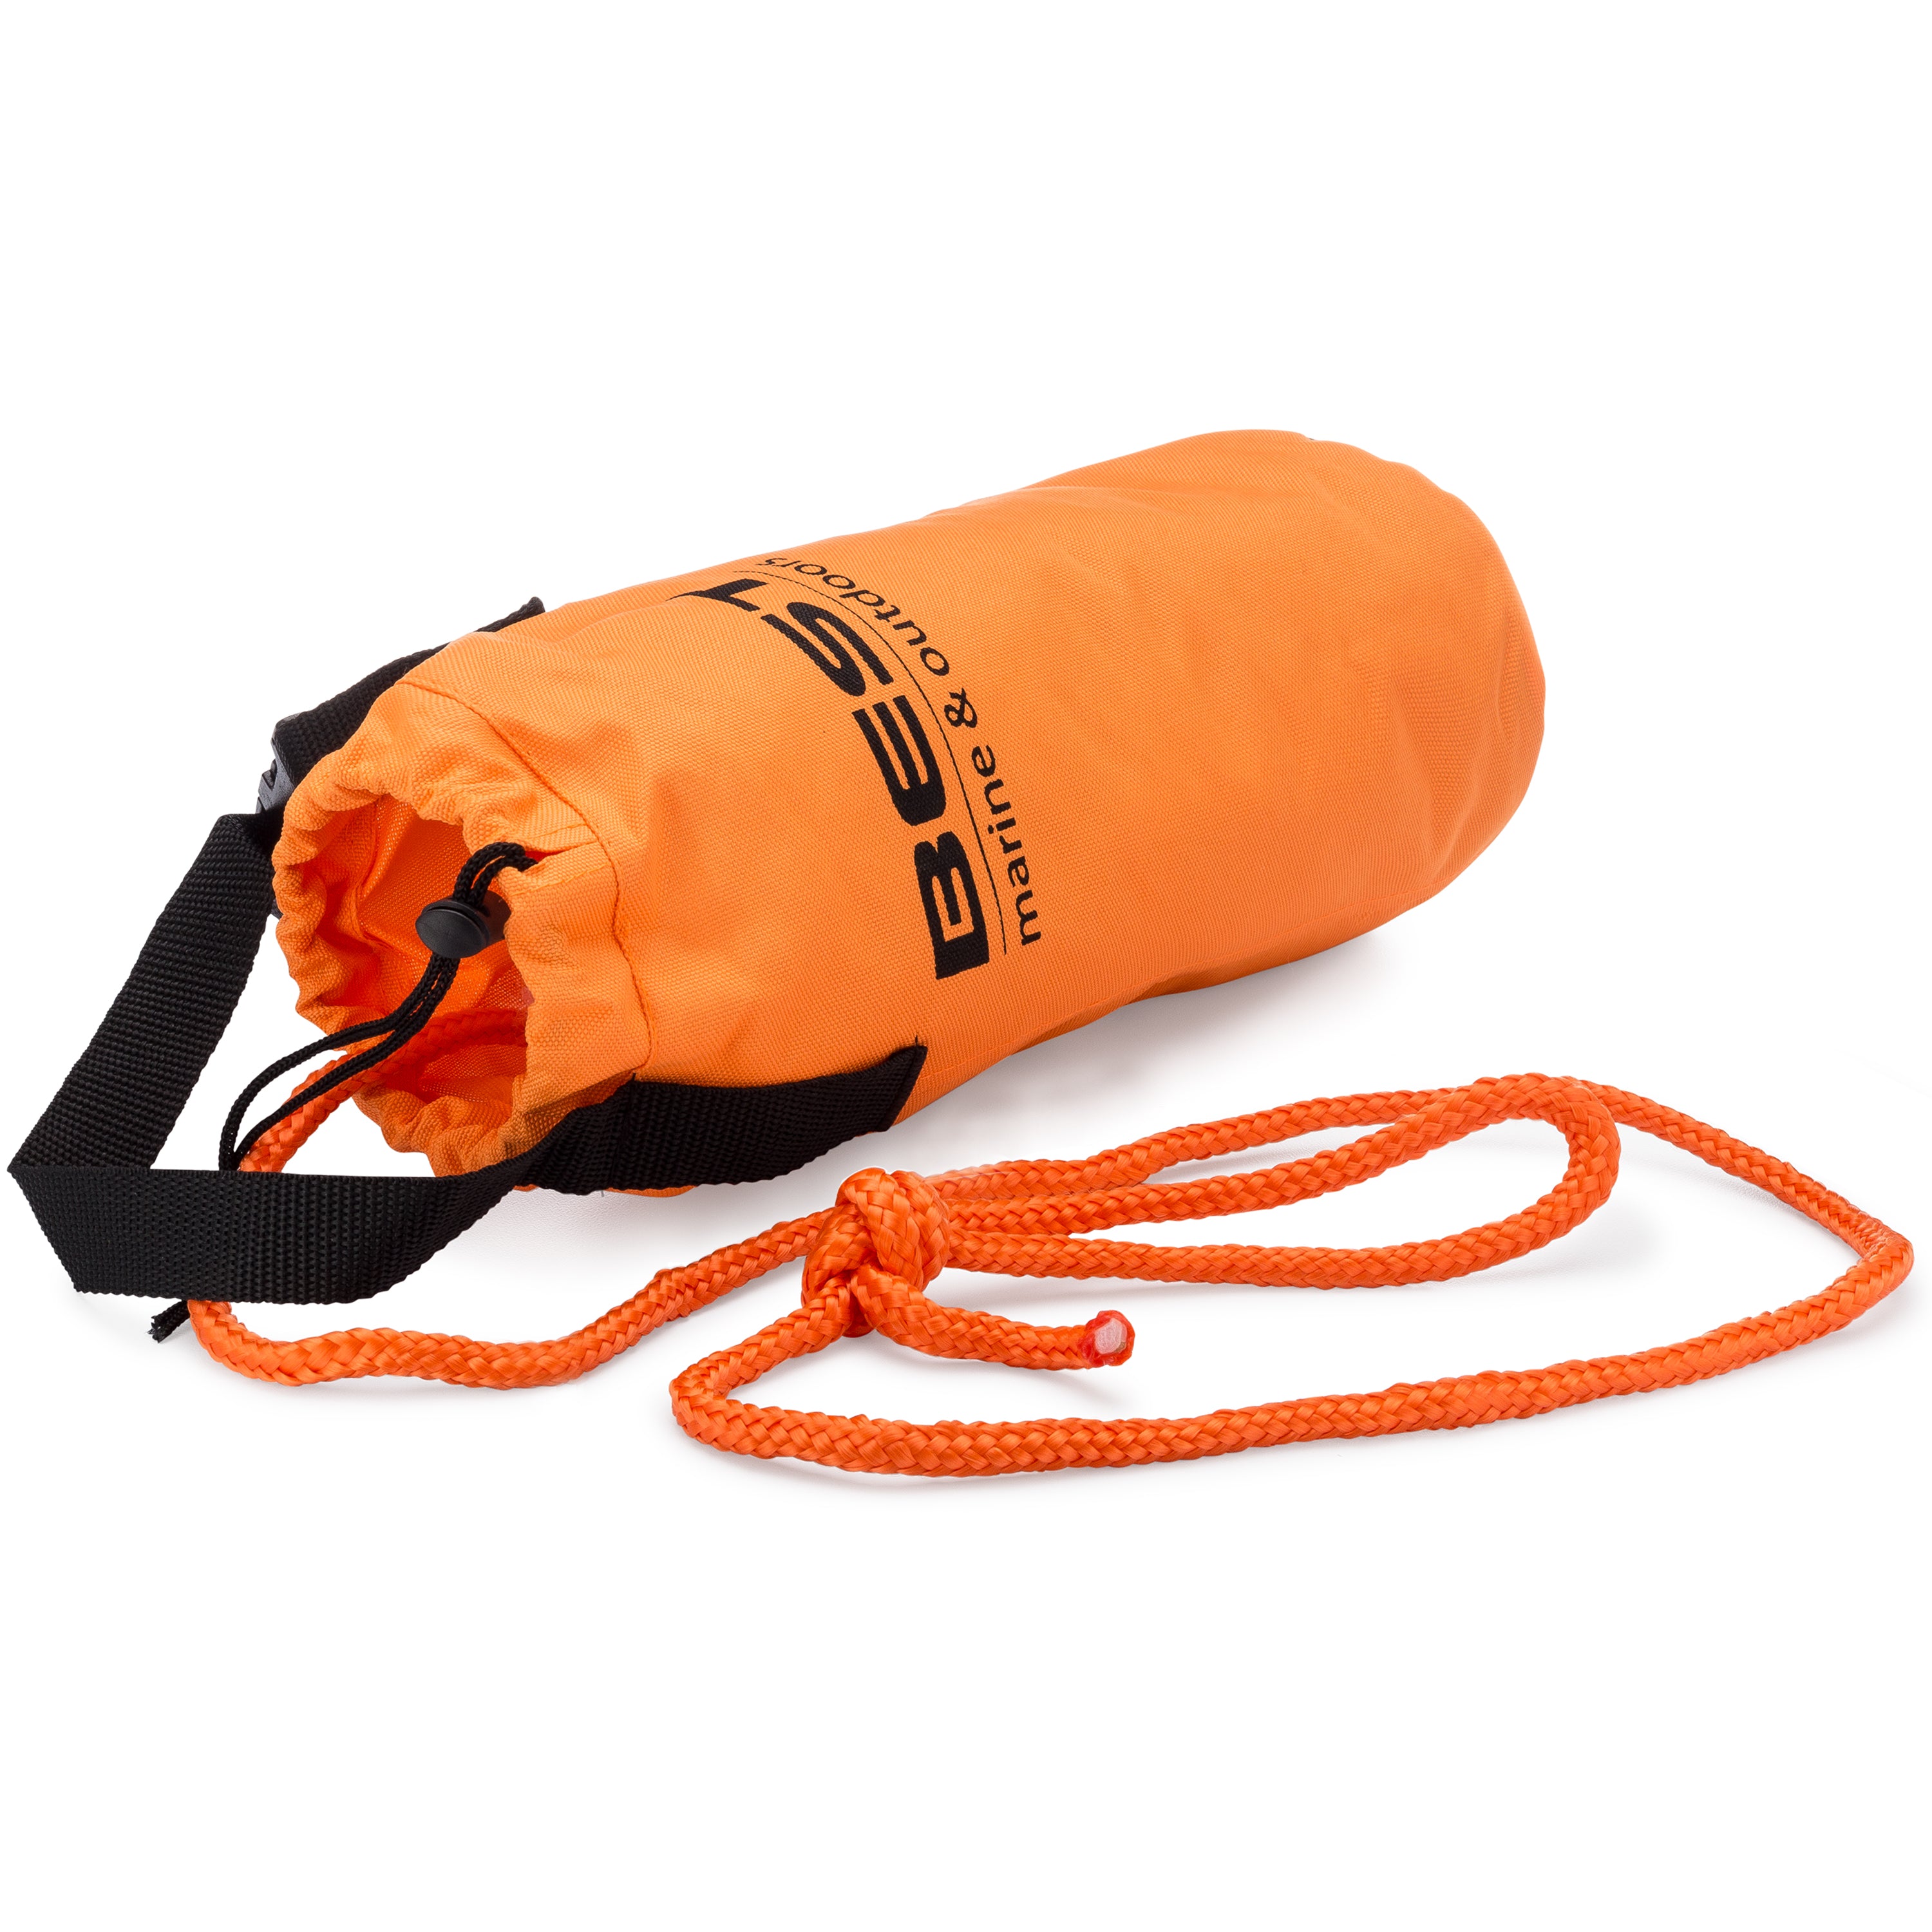 Best Marine Emergency Throw Rope Rescue Bag, Throwable Safety Device, Boat Safety Kit for Kayaking, Boating, Lifeguard ＆ Ice Fishing